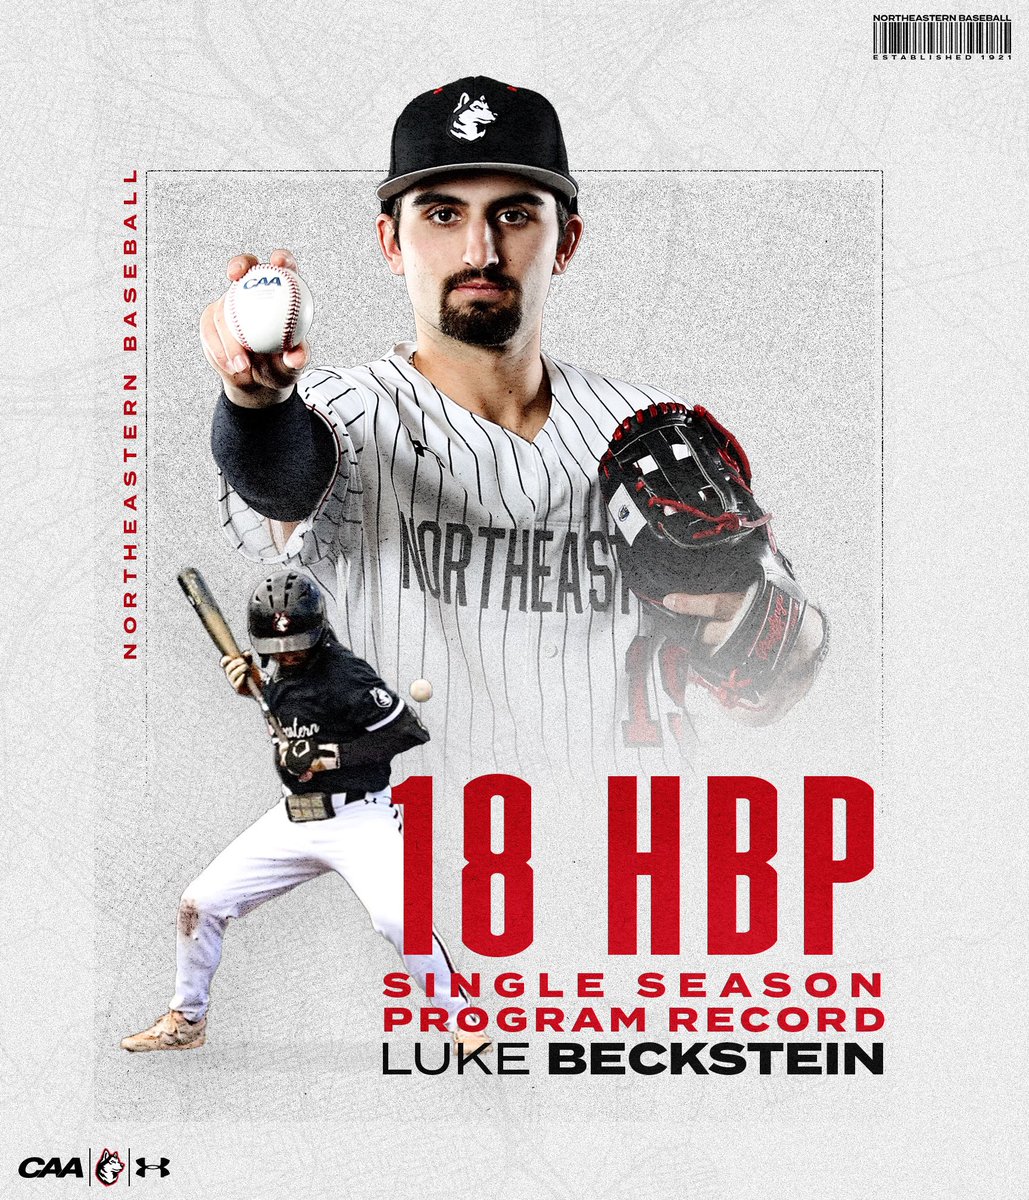 In today’s win, Luke Beckstein (@lukebeckstein) was hit by a pitch for the 18th time this season, which sets a new single season program record! AND it counted as an RBI 🤘